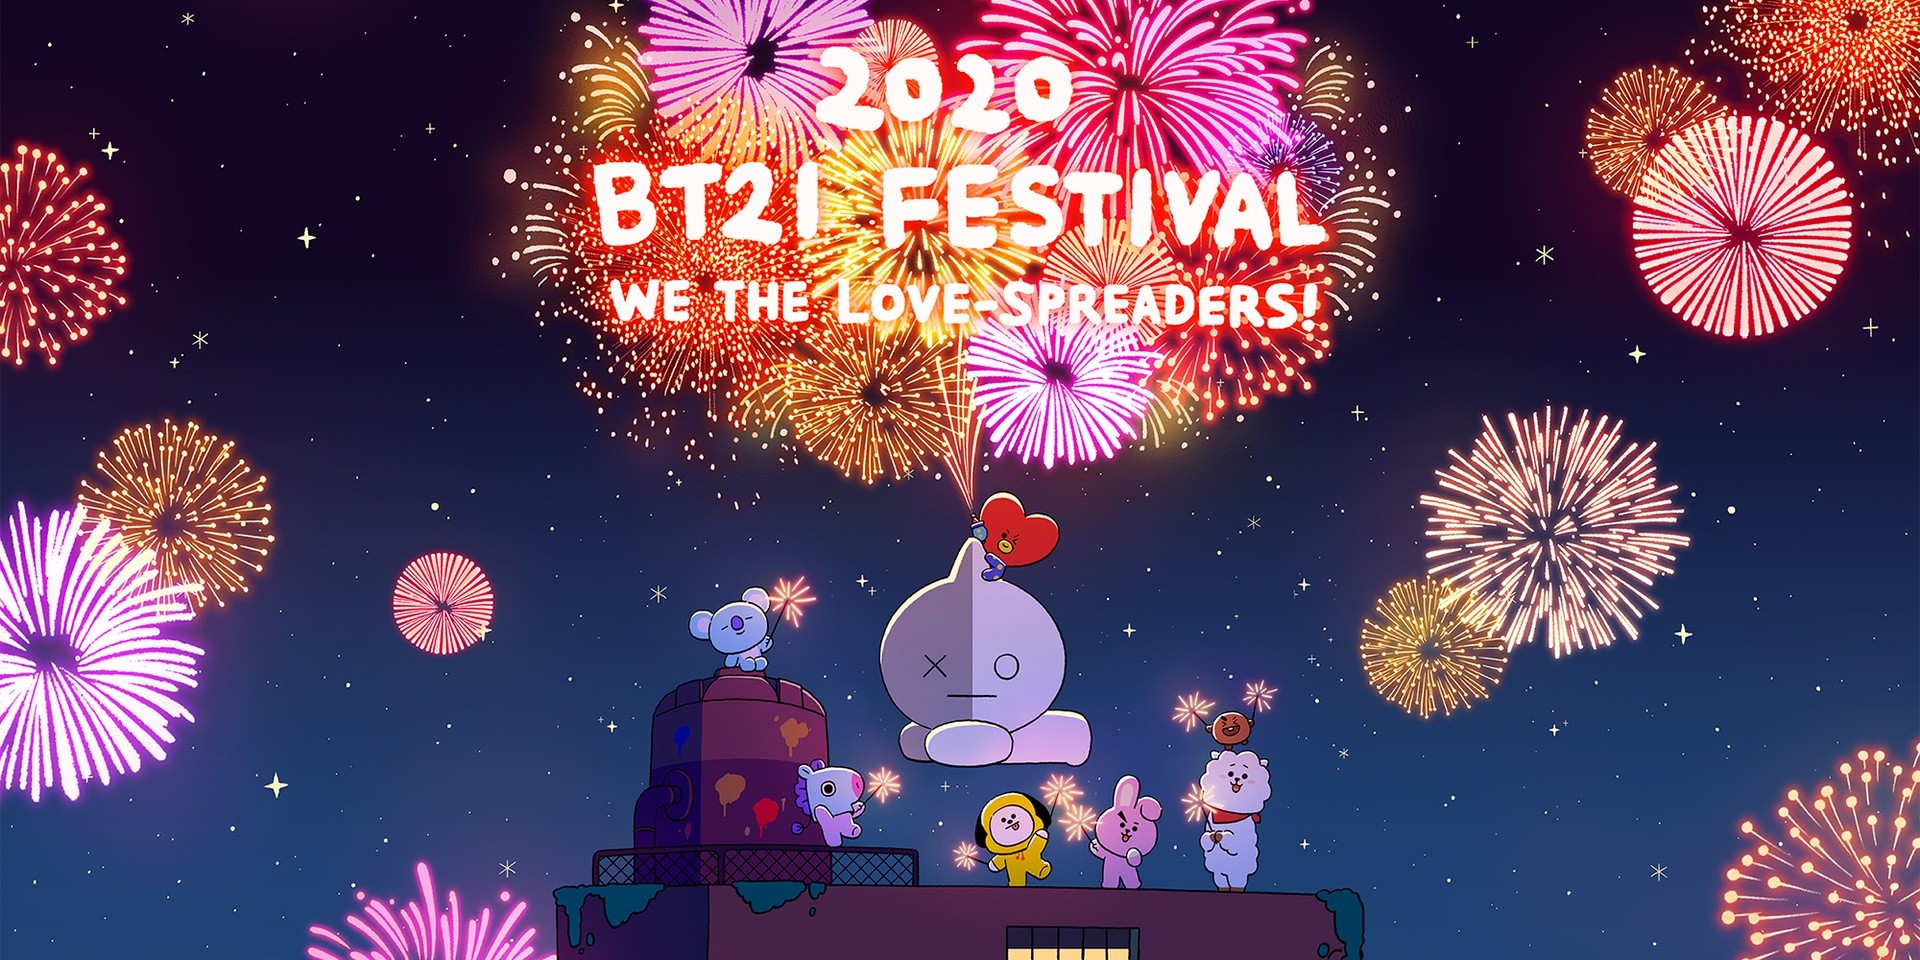 Celebrate the 3rd anniversary of BT21, BTS’ LINE FRIENDS characters, this December with the 2020 BT21 Festival